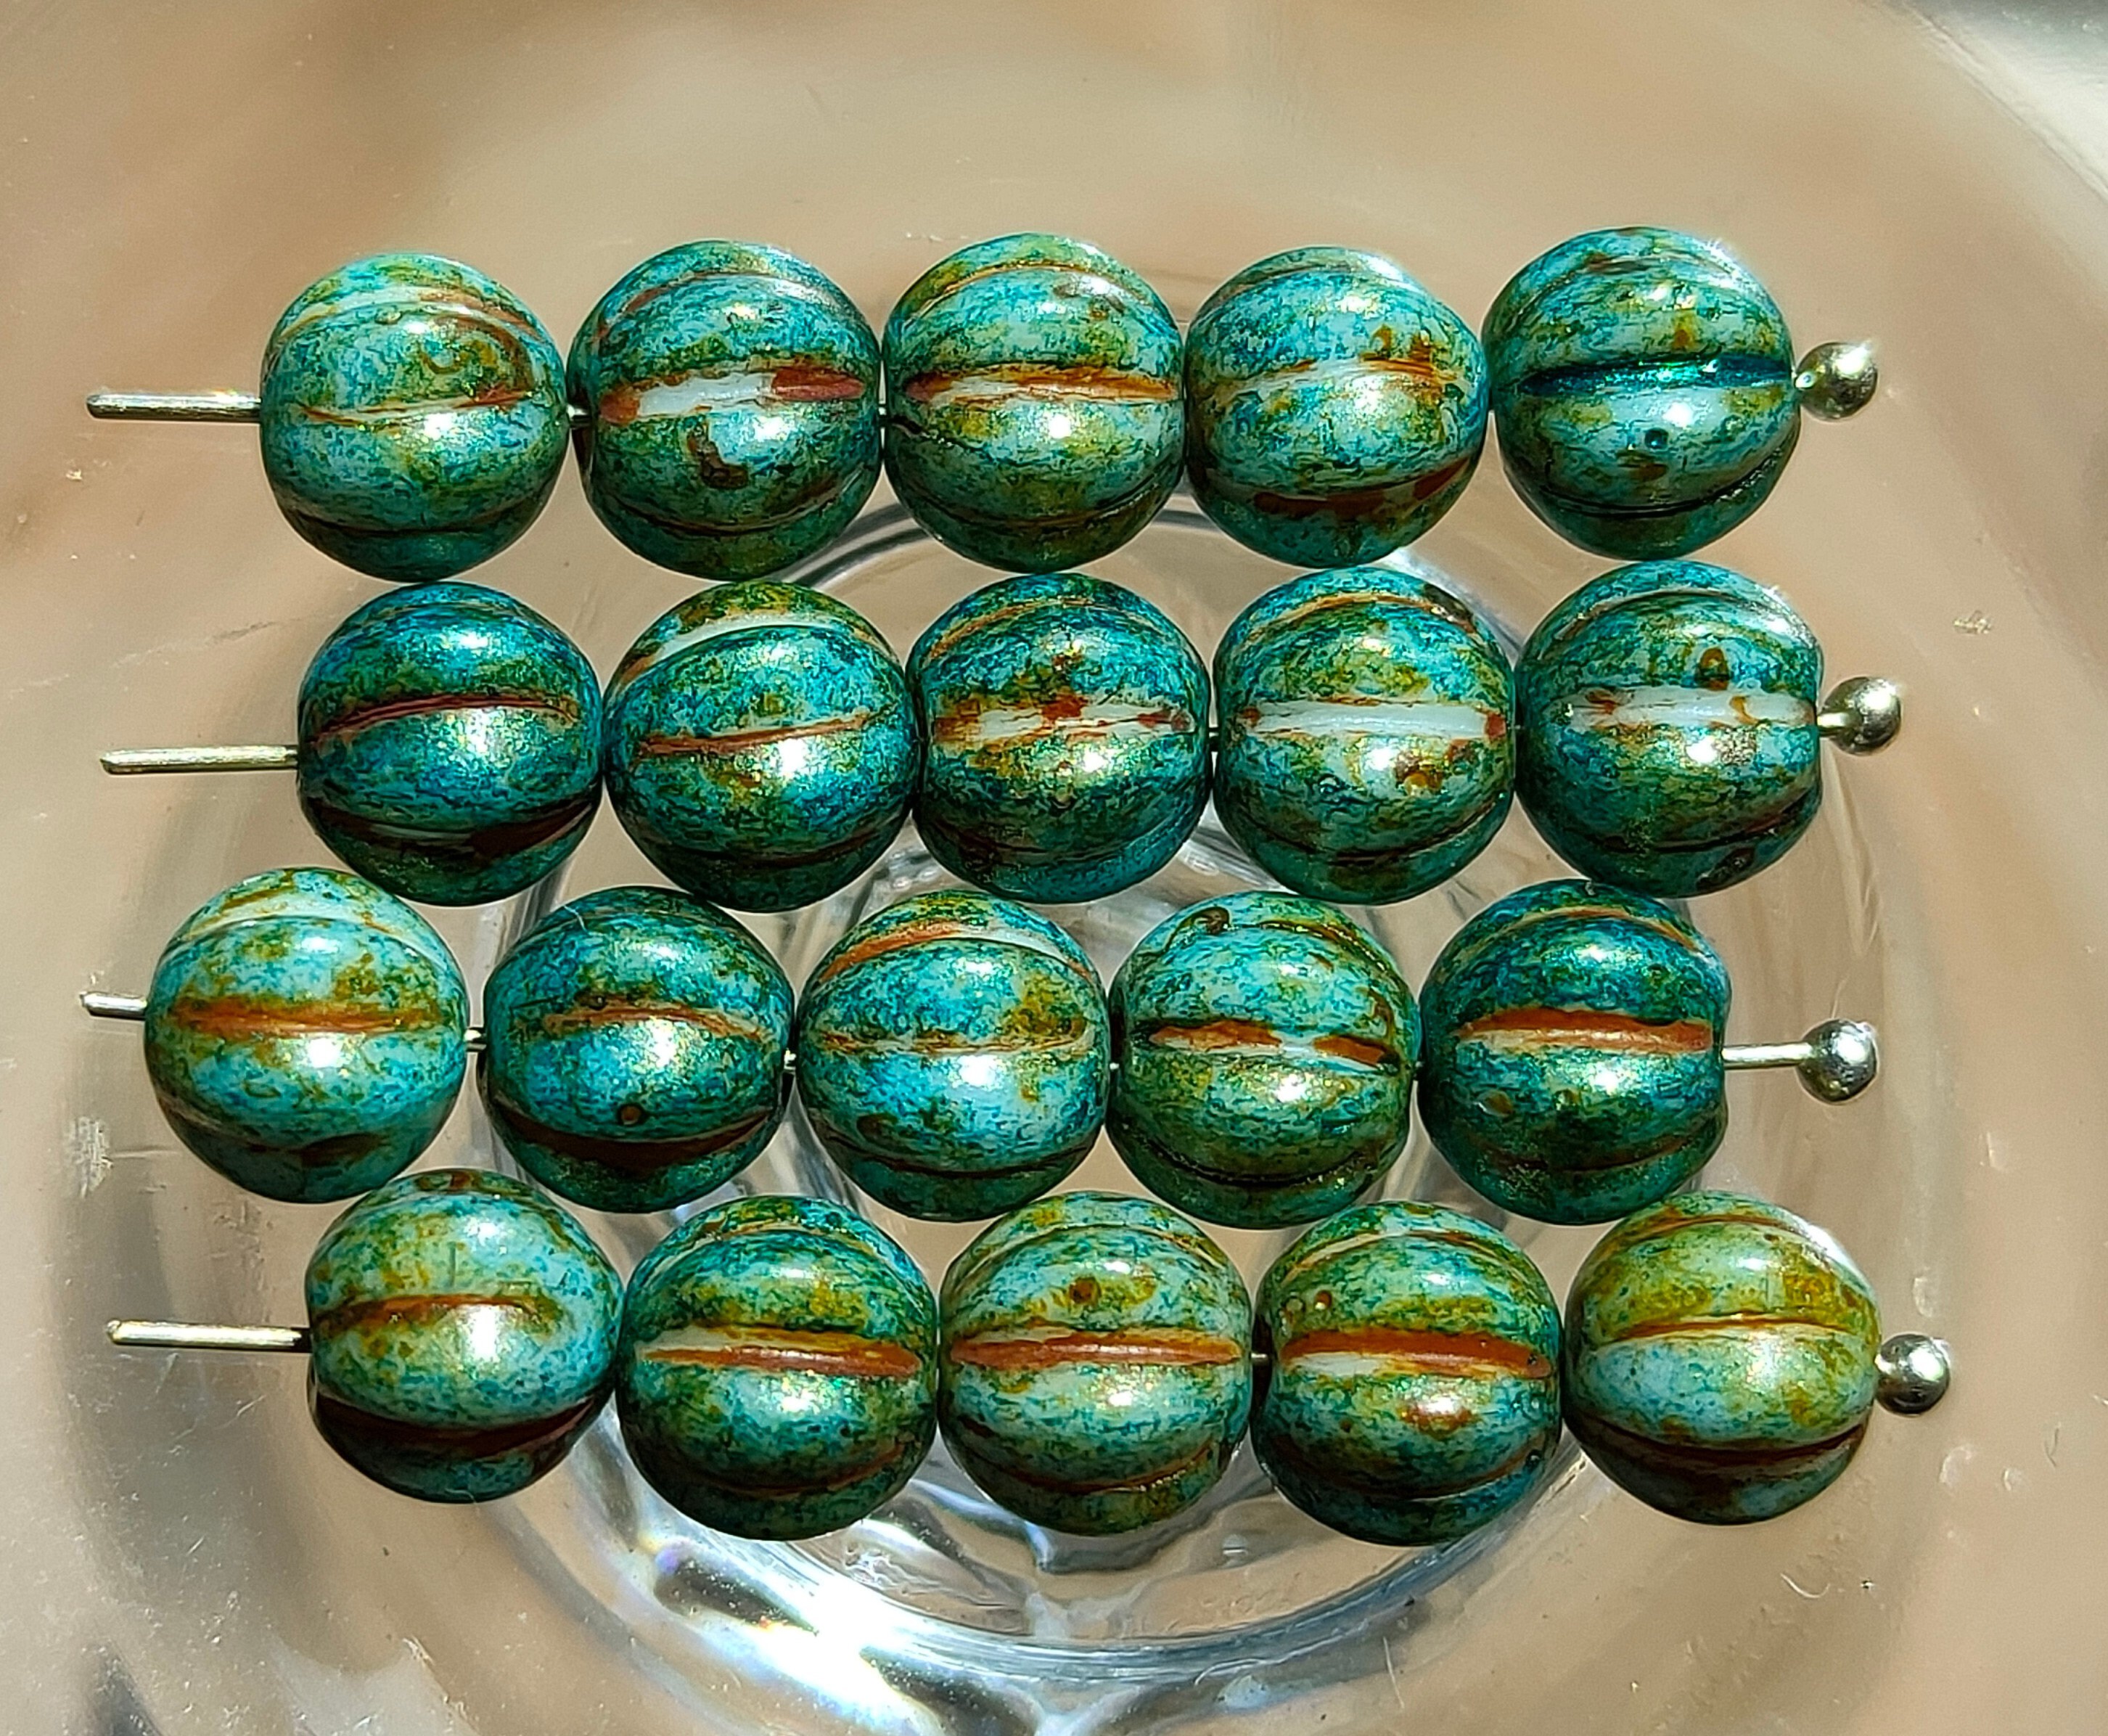 20 8mm Melon Beads Czech Glass Beads for Jewelry Making Fluted Round Green  Mint With Gold Wash 20 Beads 